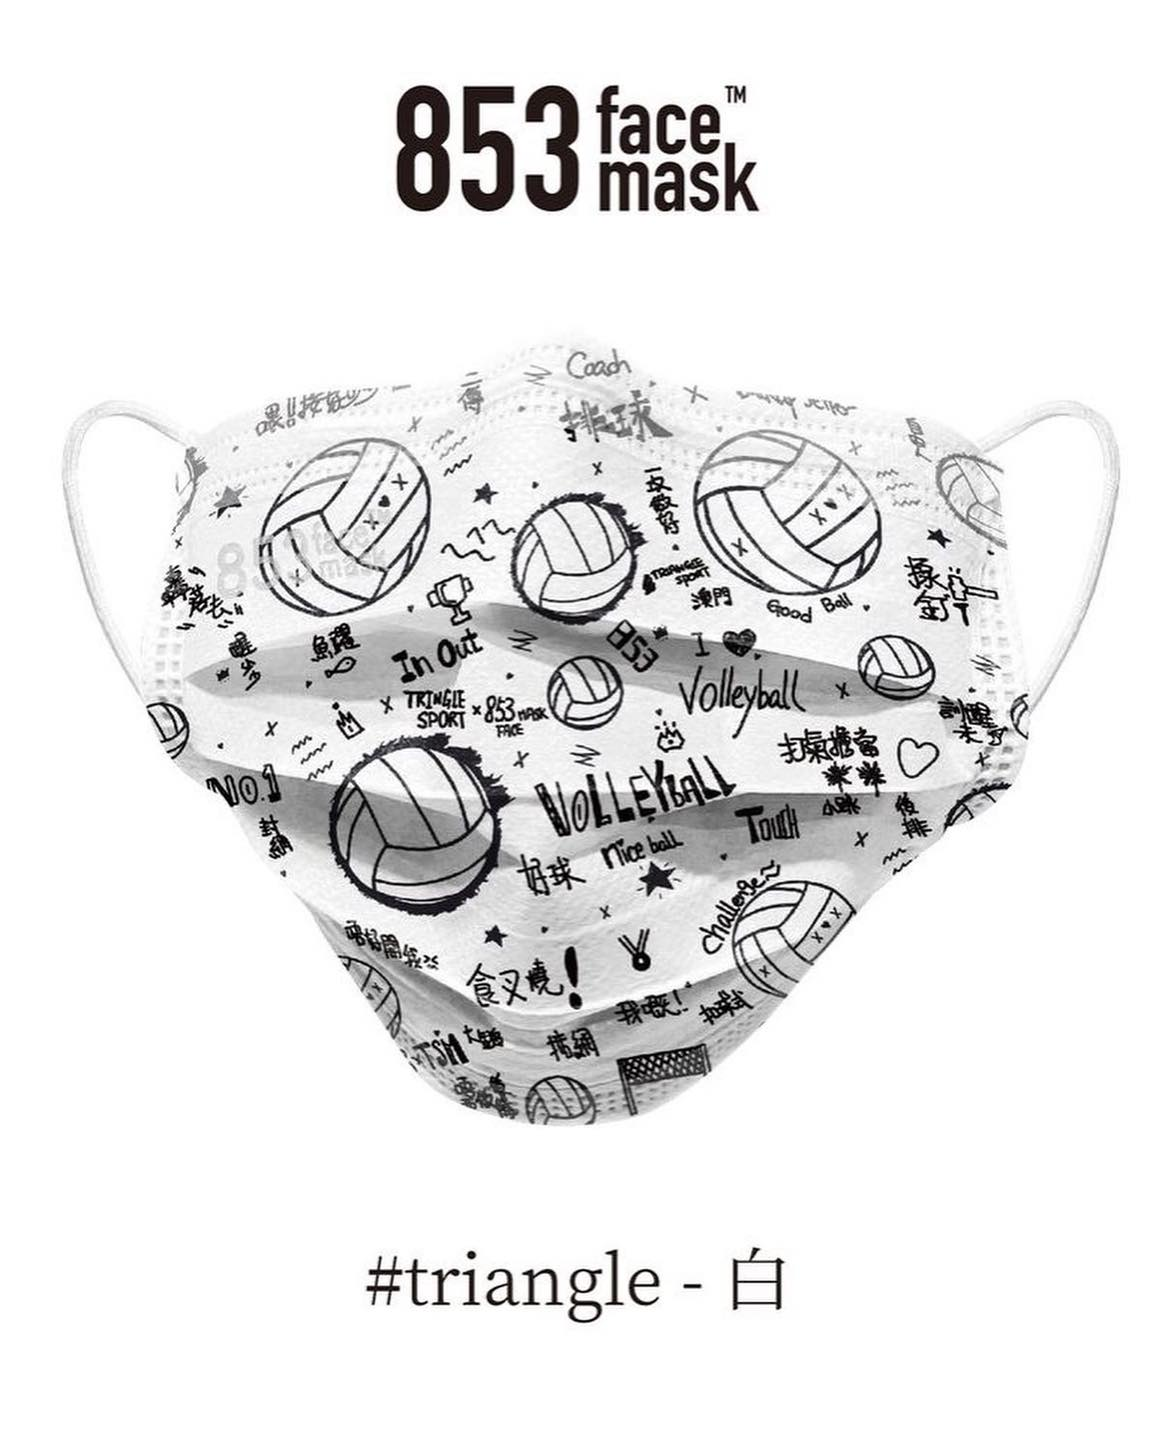 ASTM Level 3 口罩（853 Face Mask™️x TRIANGLE Sport 白）非獨立包裝10片